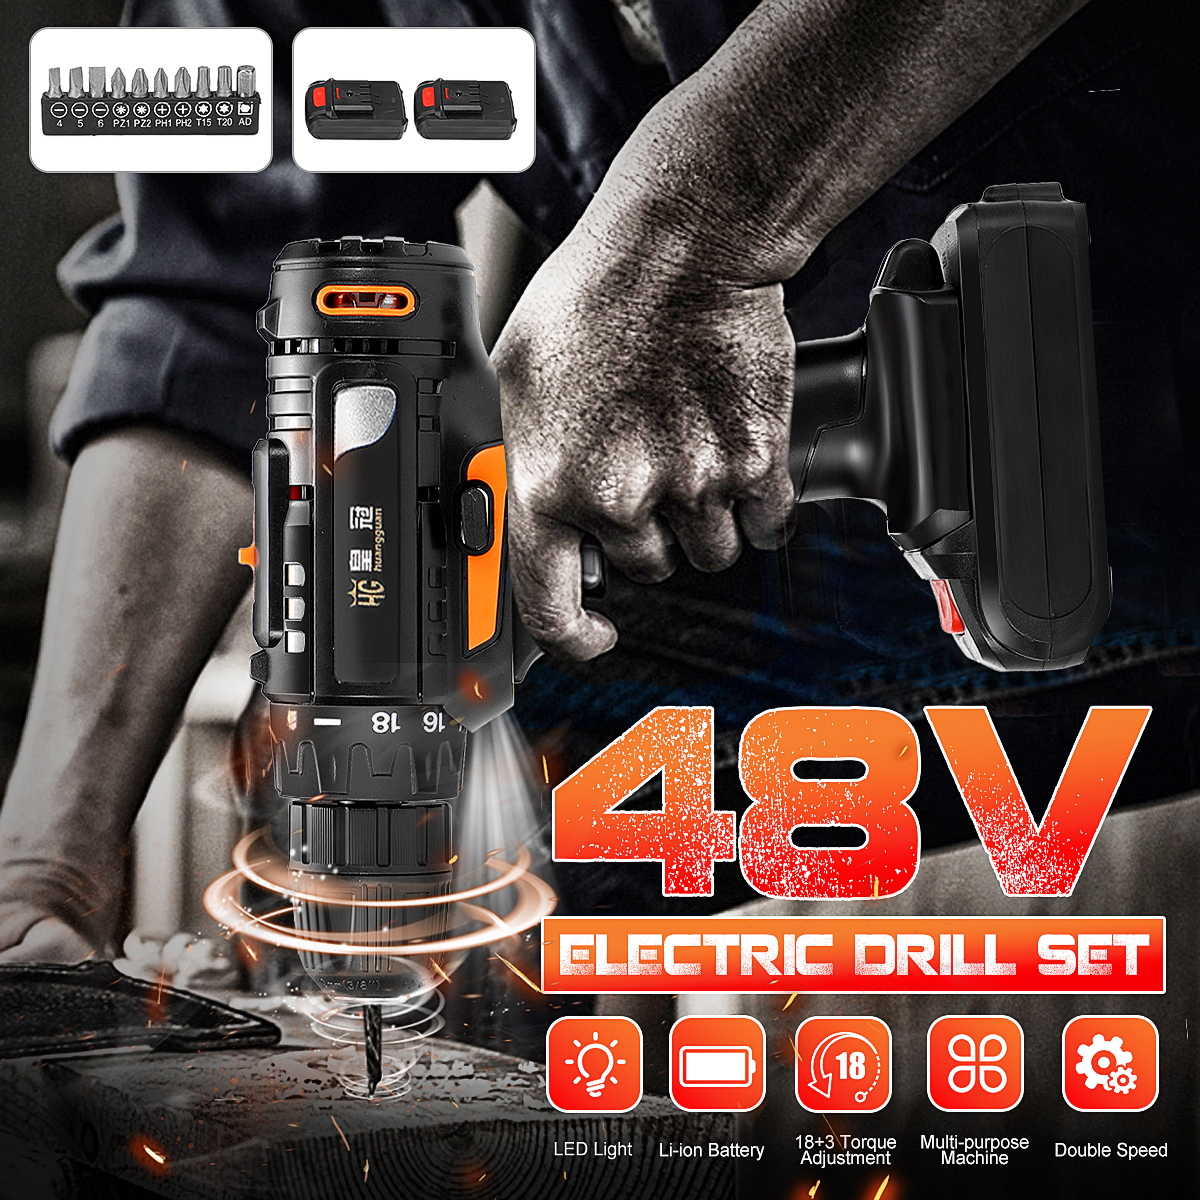 48V-Electric-Drill-Cordless-Rechargeable-Screwdriver-Drill-Screw-Set-Repair-Tools-Kit-1501700-2